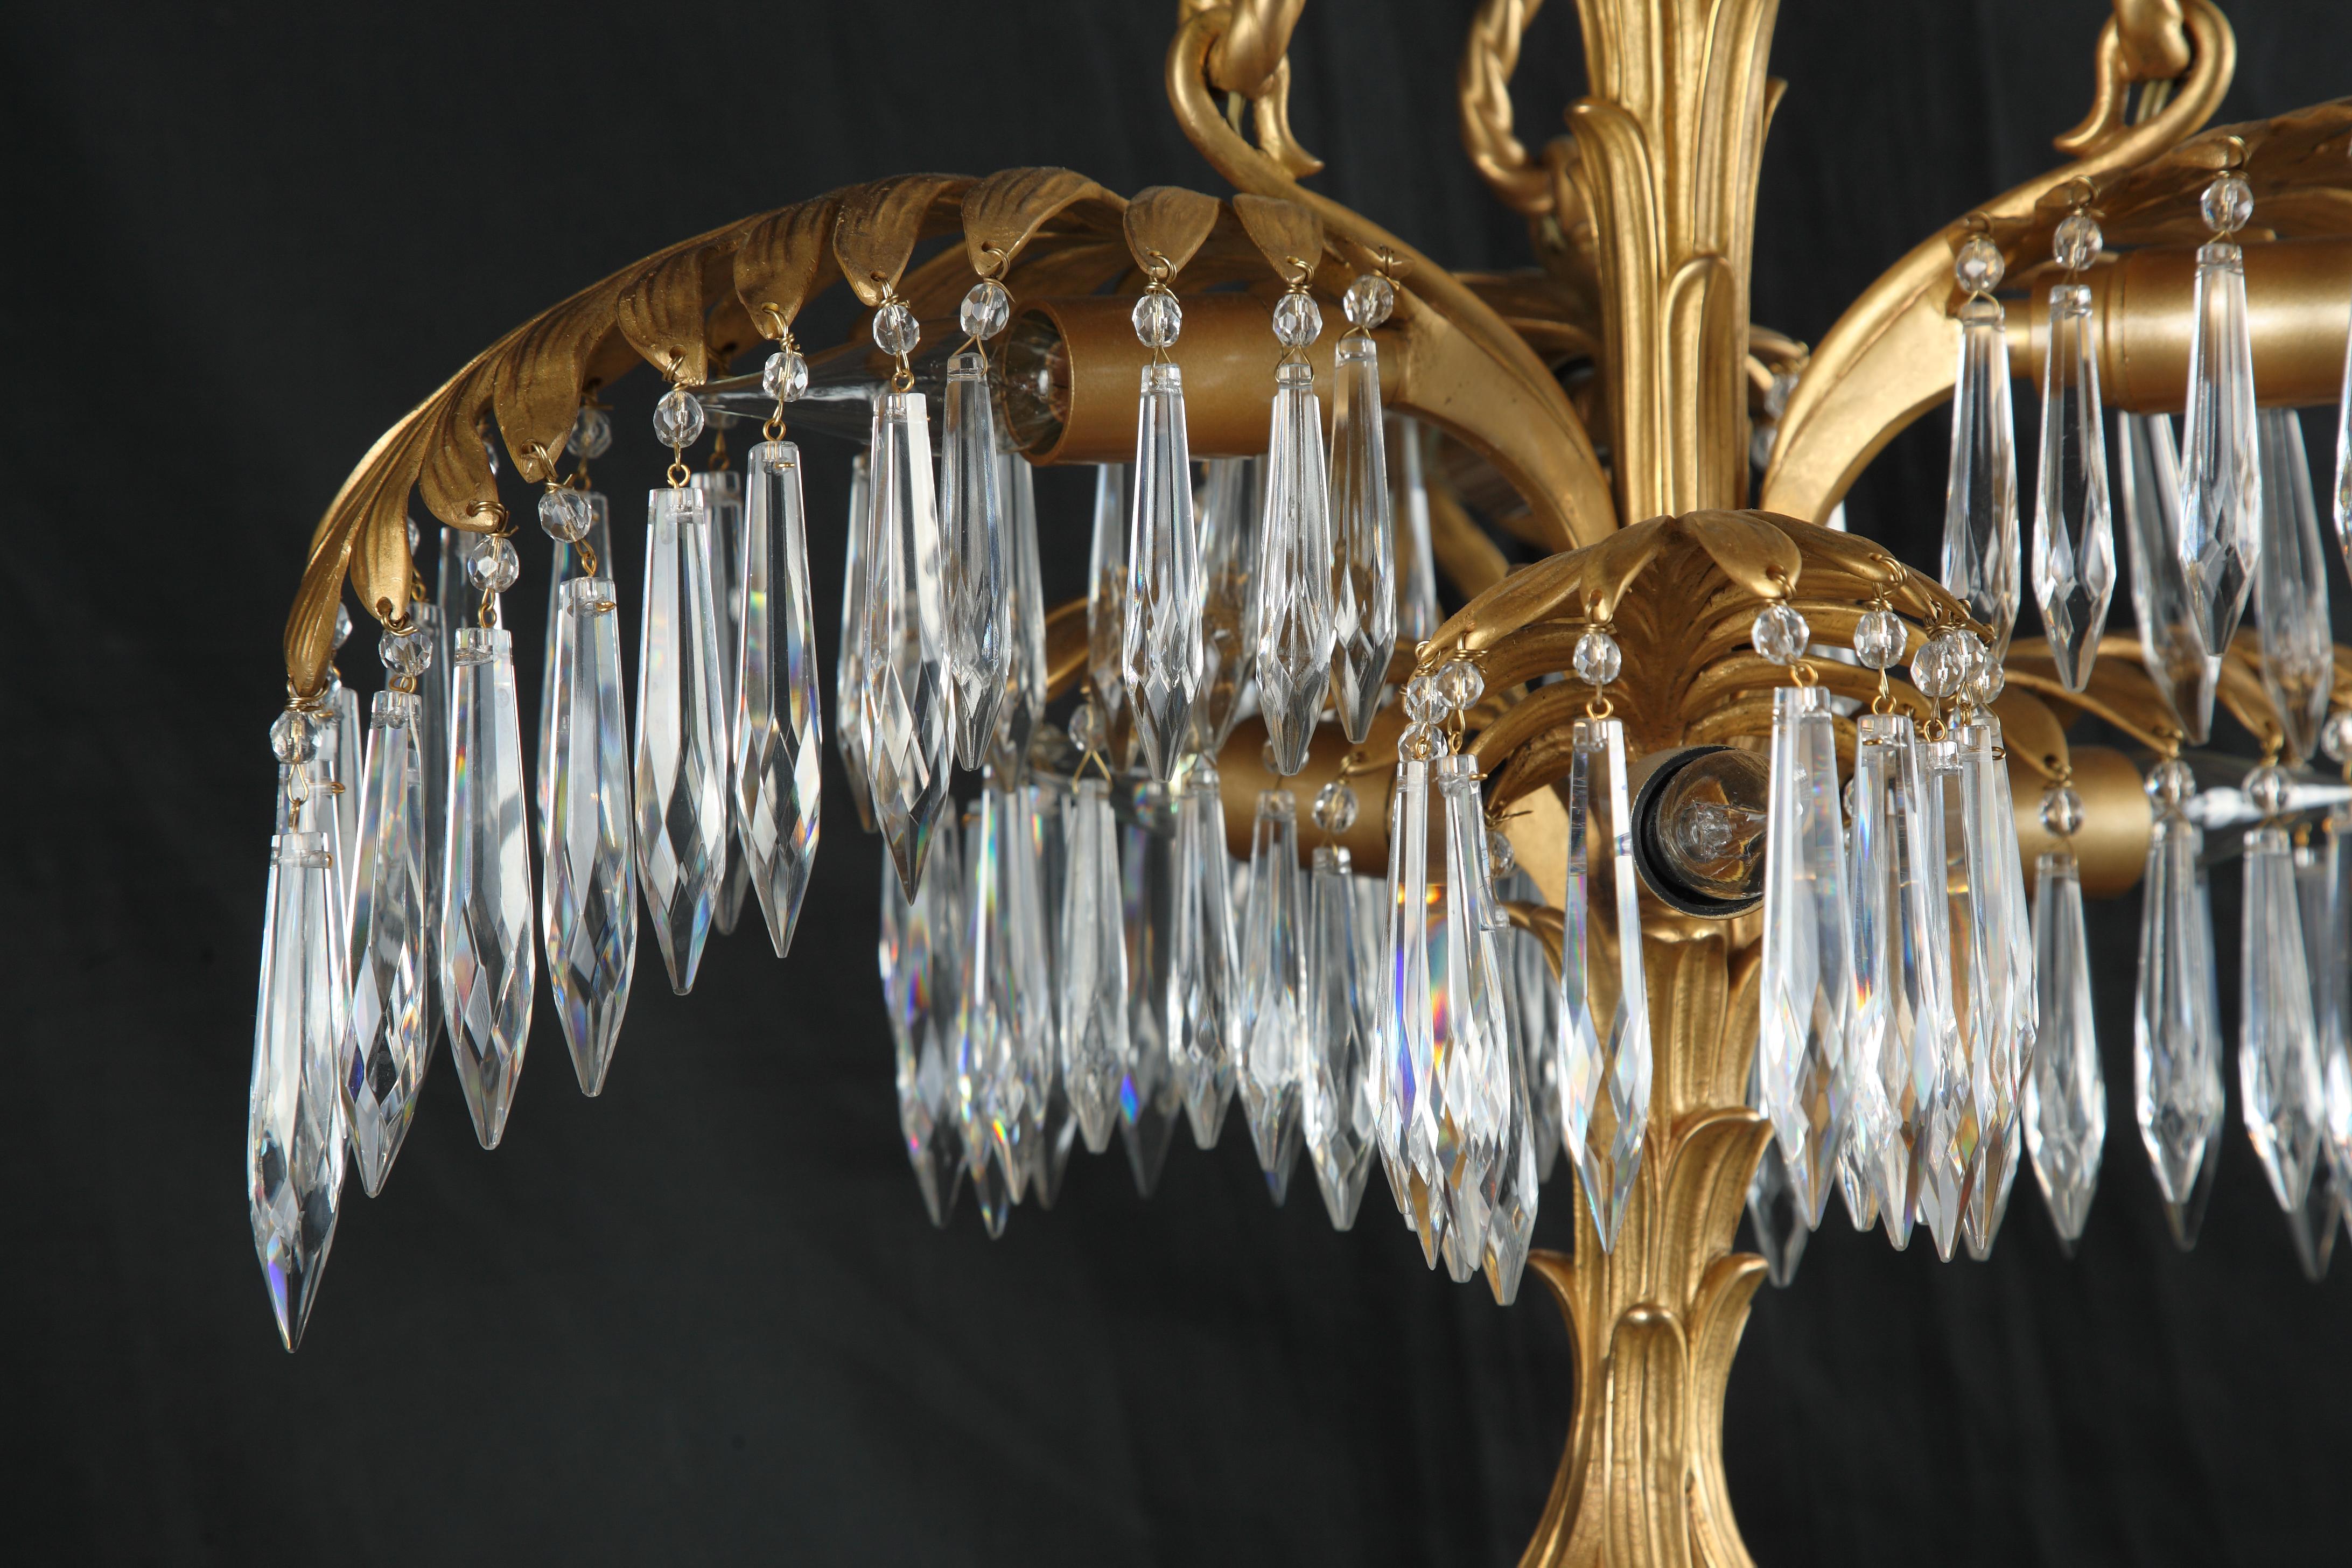 French Fine Crystal and Gilded Bronze “Palm” Chandelier, France, Circa 1890